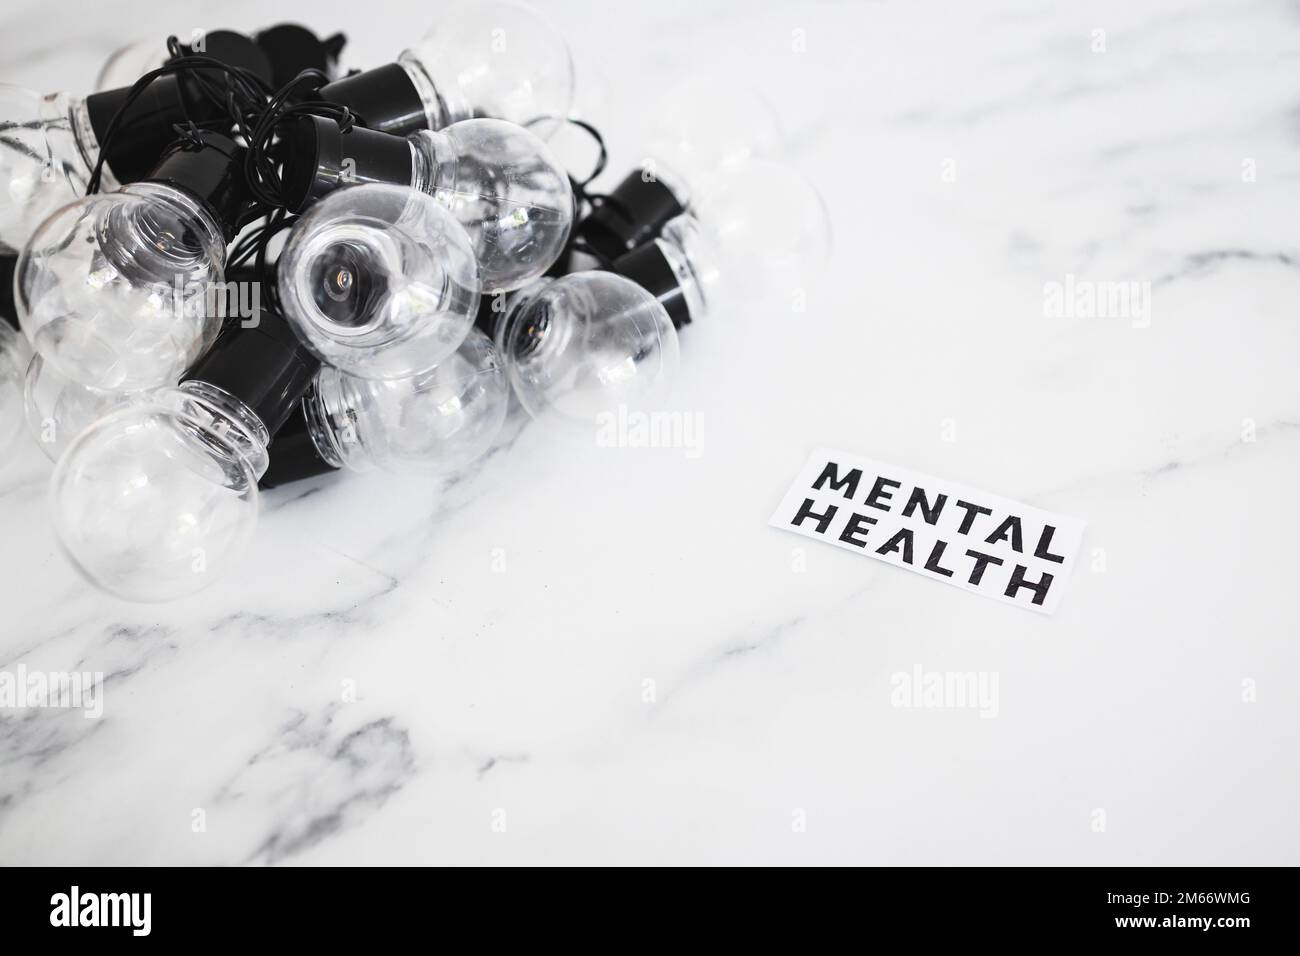 mental health text next to groupd of tangled up light bulbs, psychology concept Stock Photo